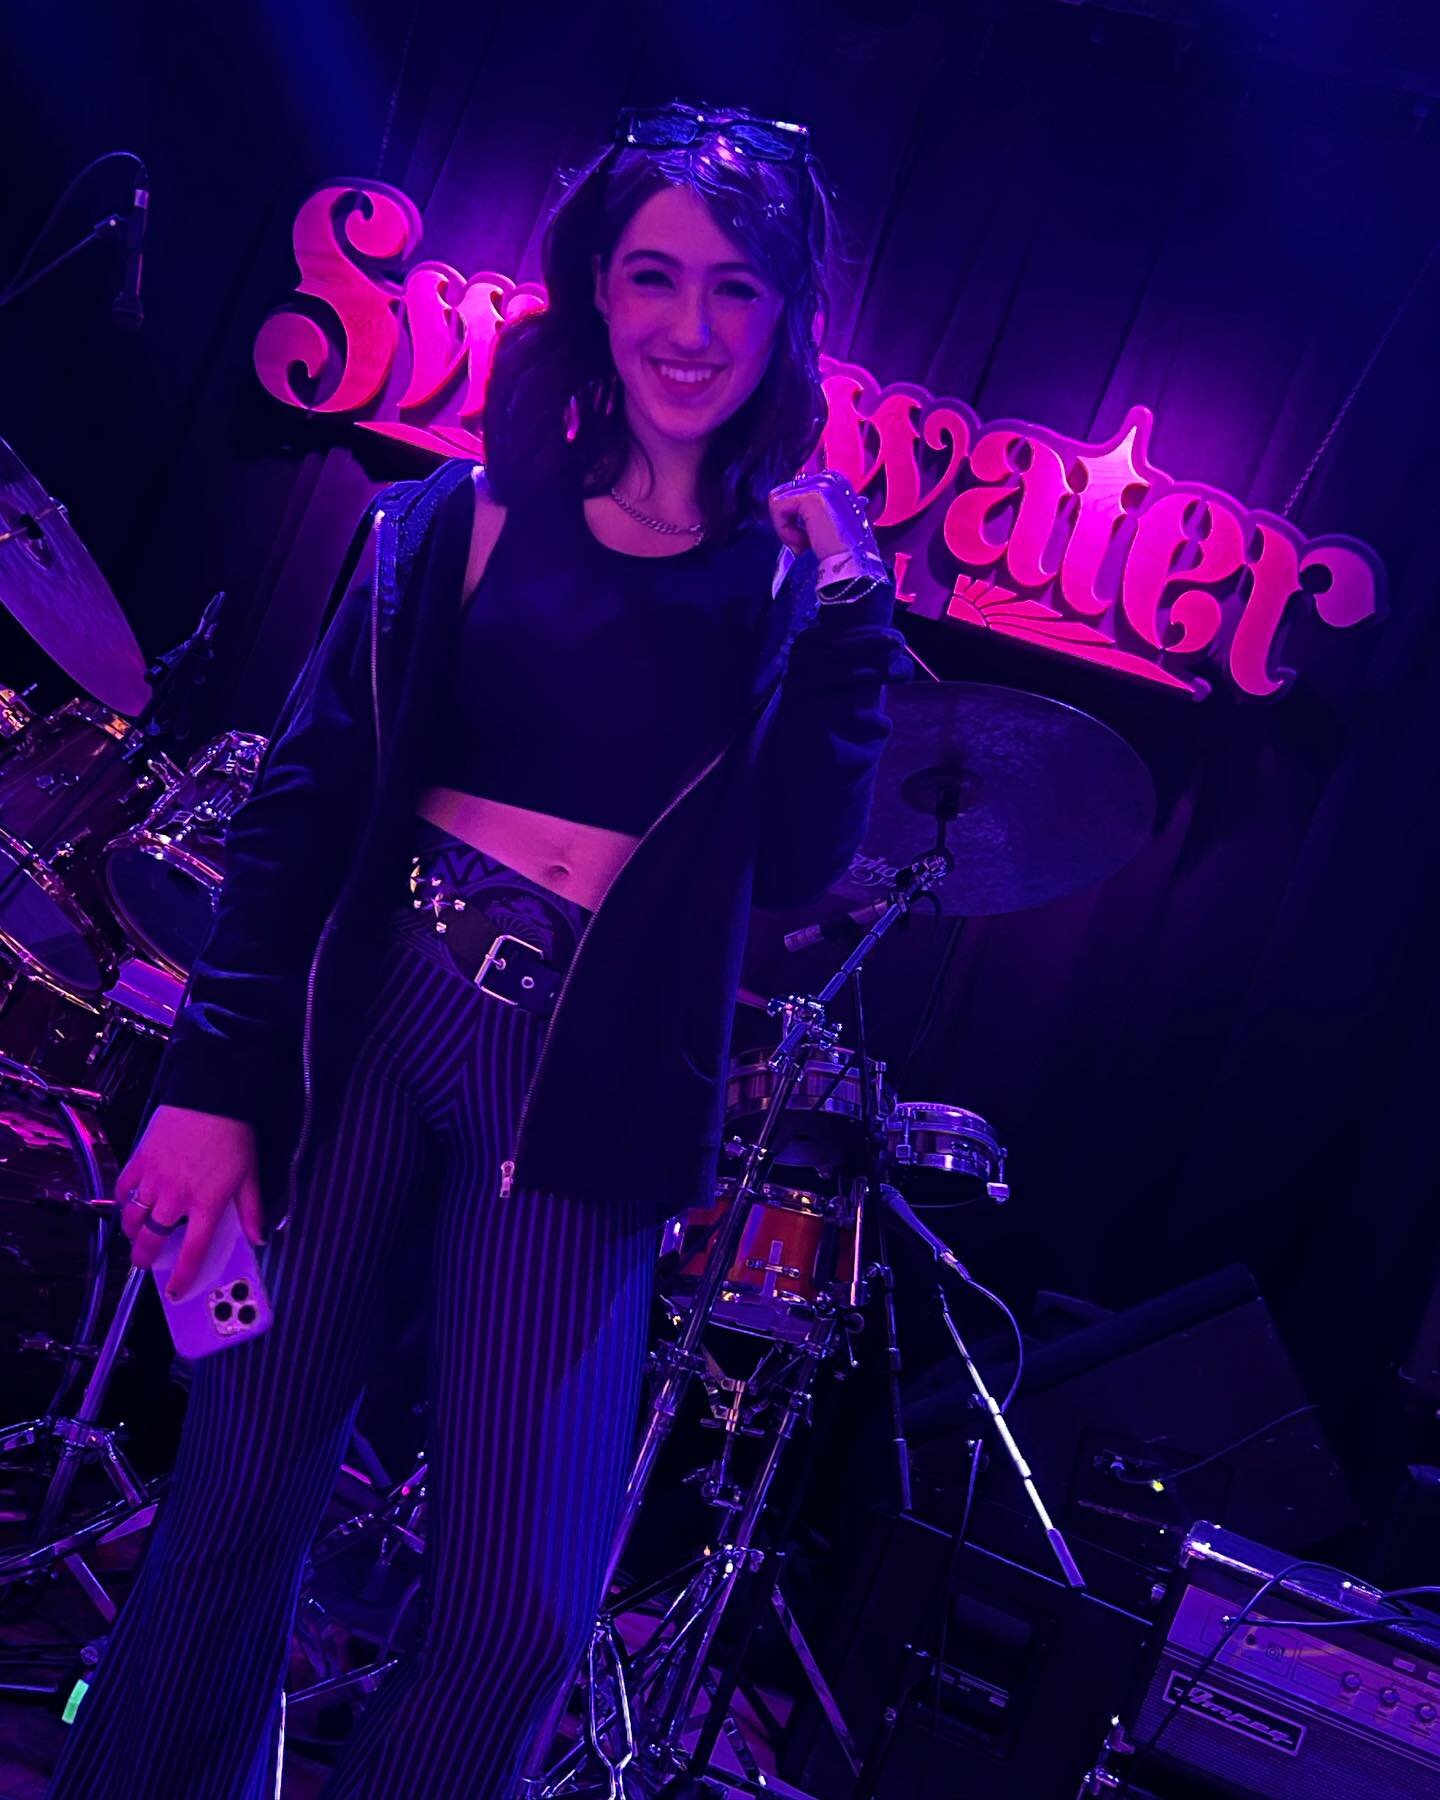 What a blasttt at @sweetwatermusichall Swipe for some clips from last night!!!Crazy vibes and an awesome crowd. You could literally feel the floor shaking from the stage!!! Thanksss so much @bearlydeadmusic for having me up. Loved getting to jam out 